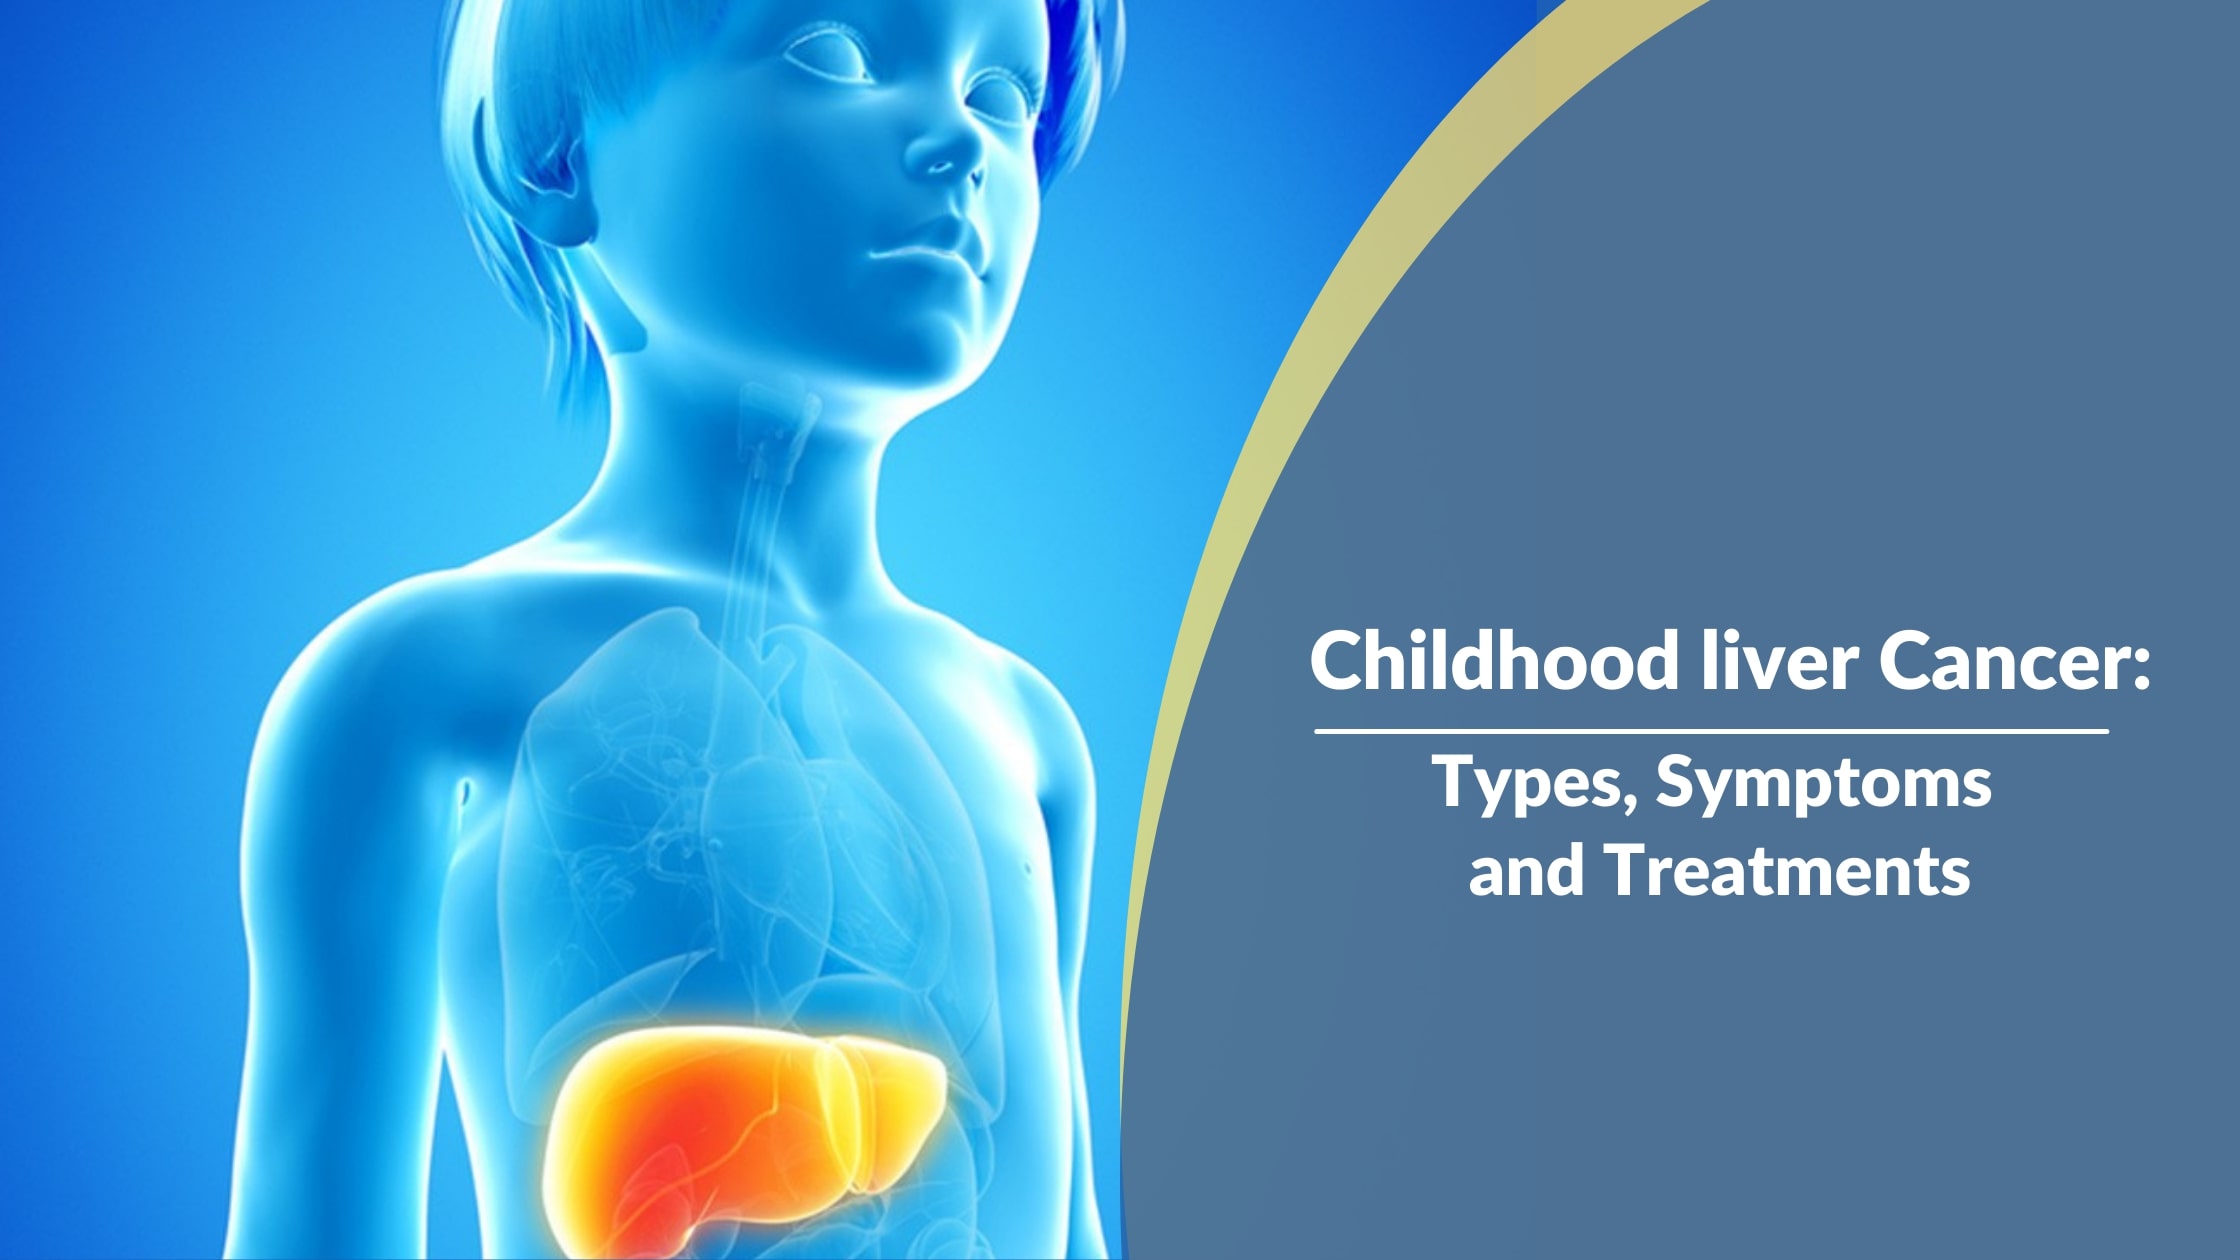 Childhood liver cancer: Types, Symptoms, and Treatments